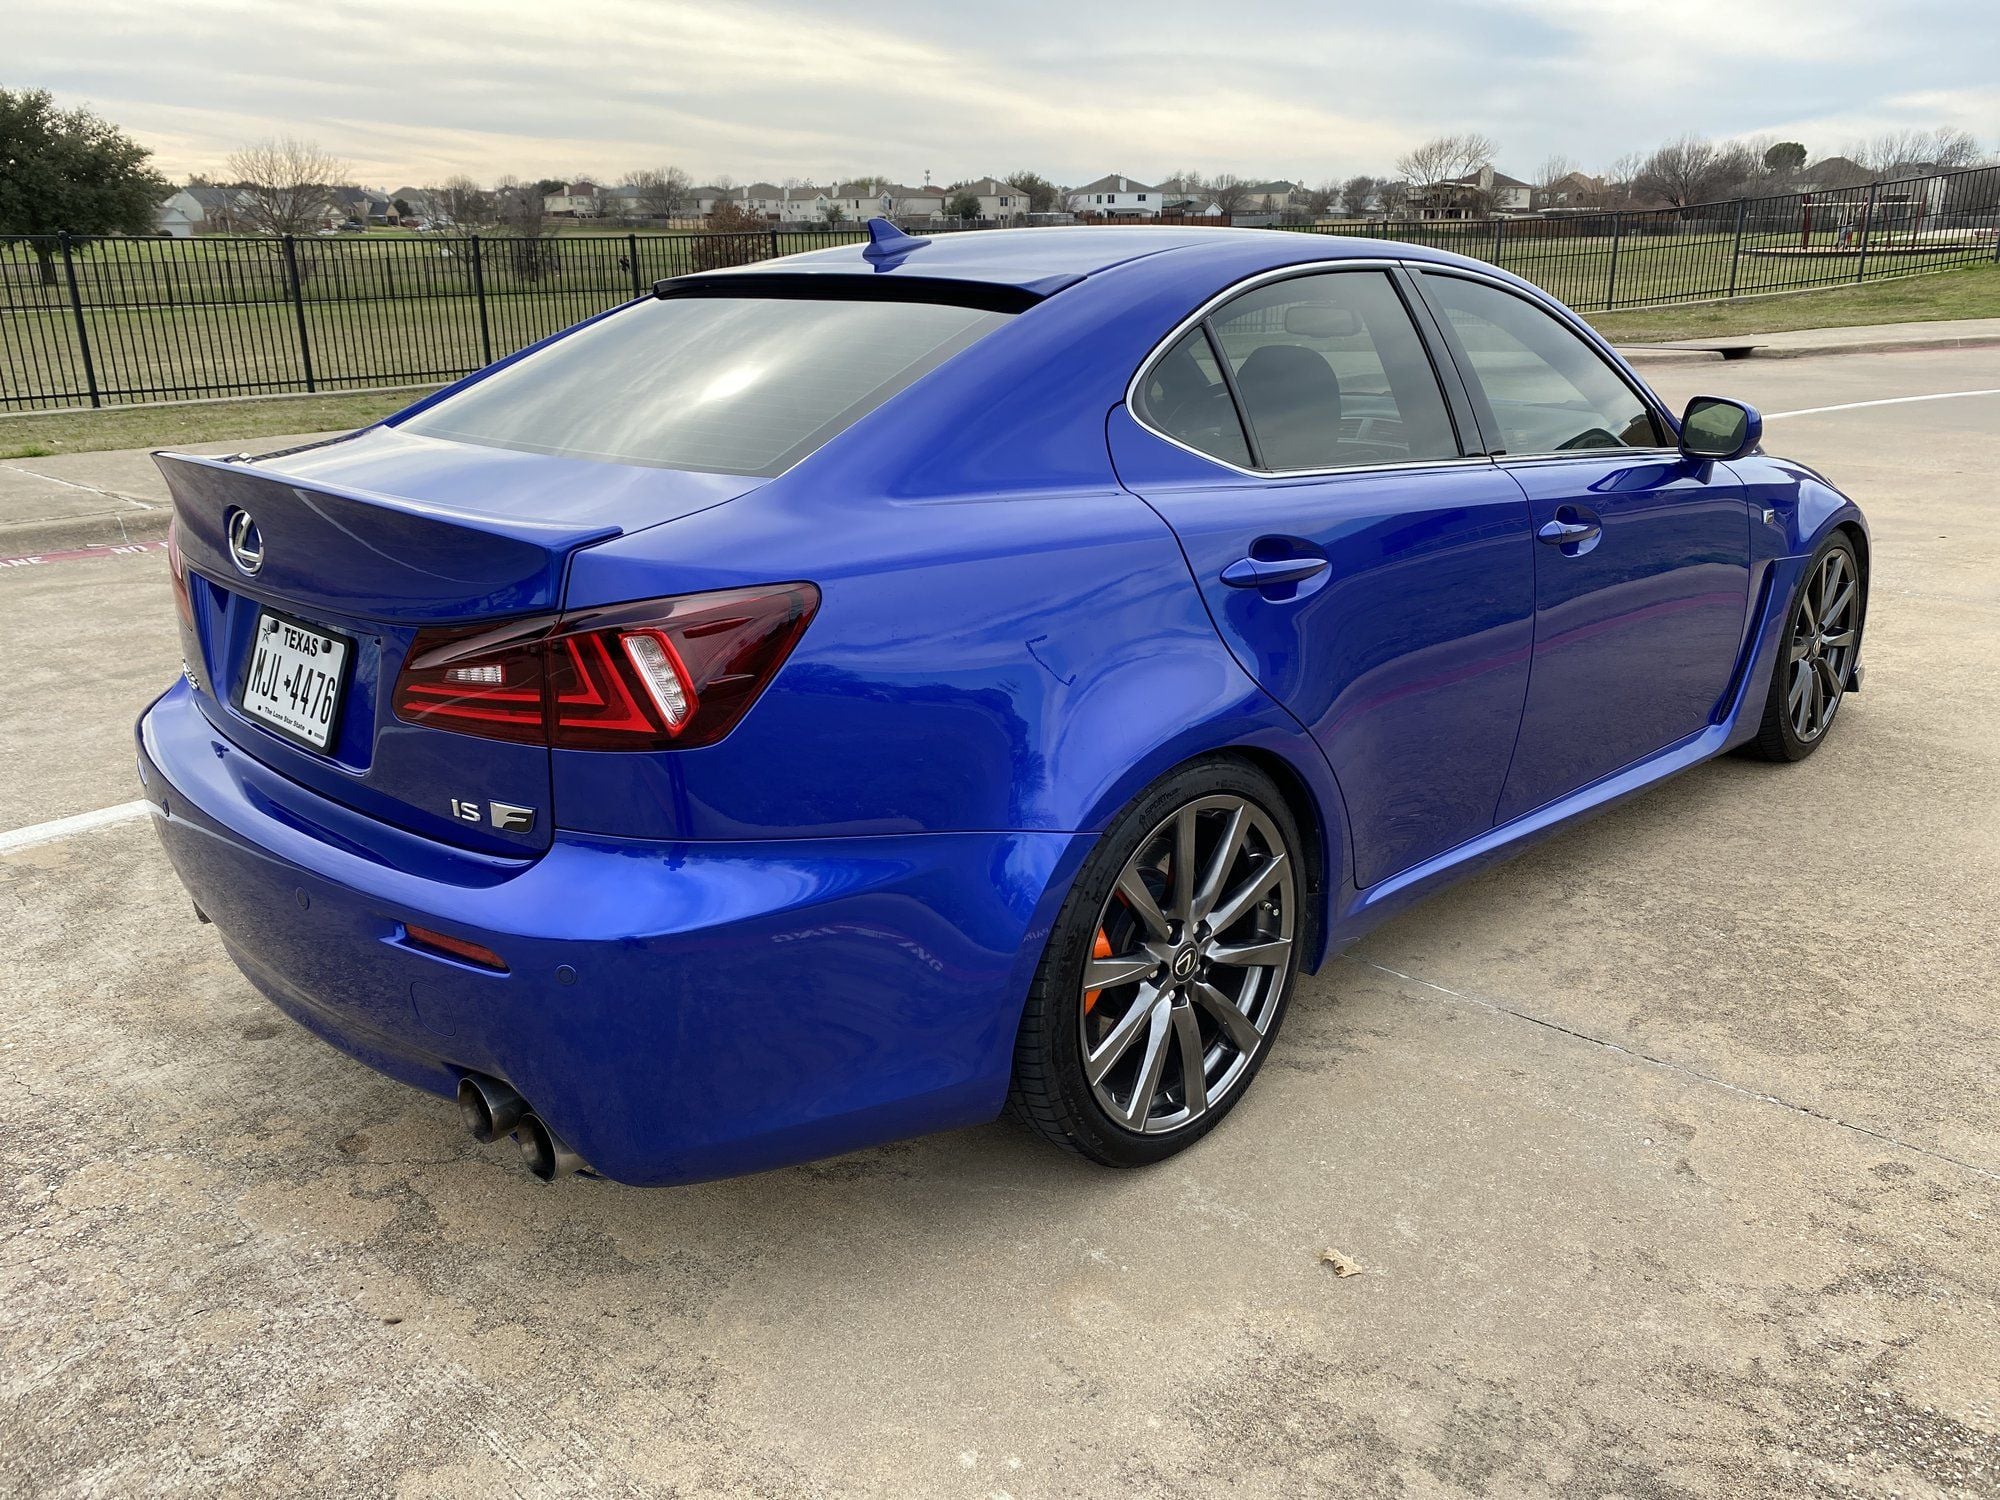 Miscellaneous - IS-F parts: RR-Racing Bazooka Exhaust, Coilovers, Vland Tailights, USRS, and more - Used - 2008 to 2014 Lexus IS F - Fort Worth, TX 76123, United States